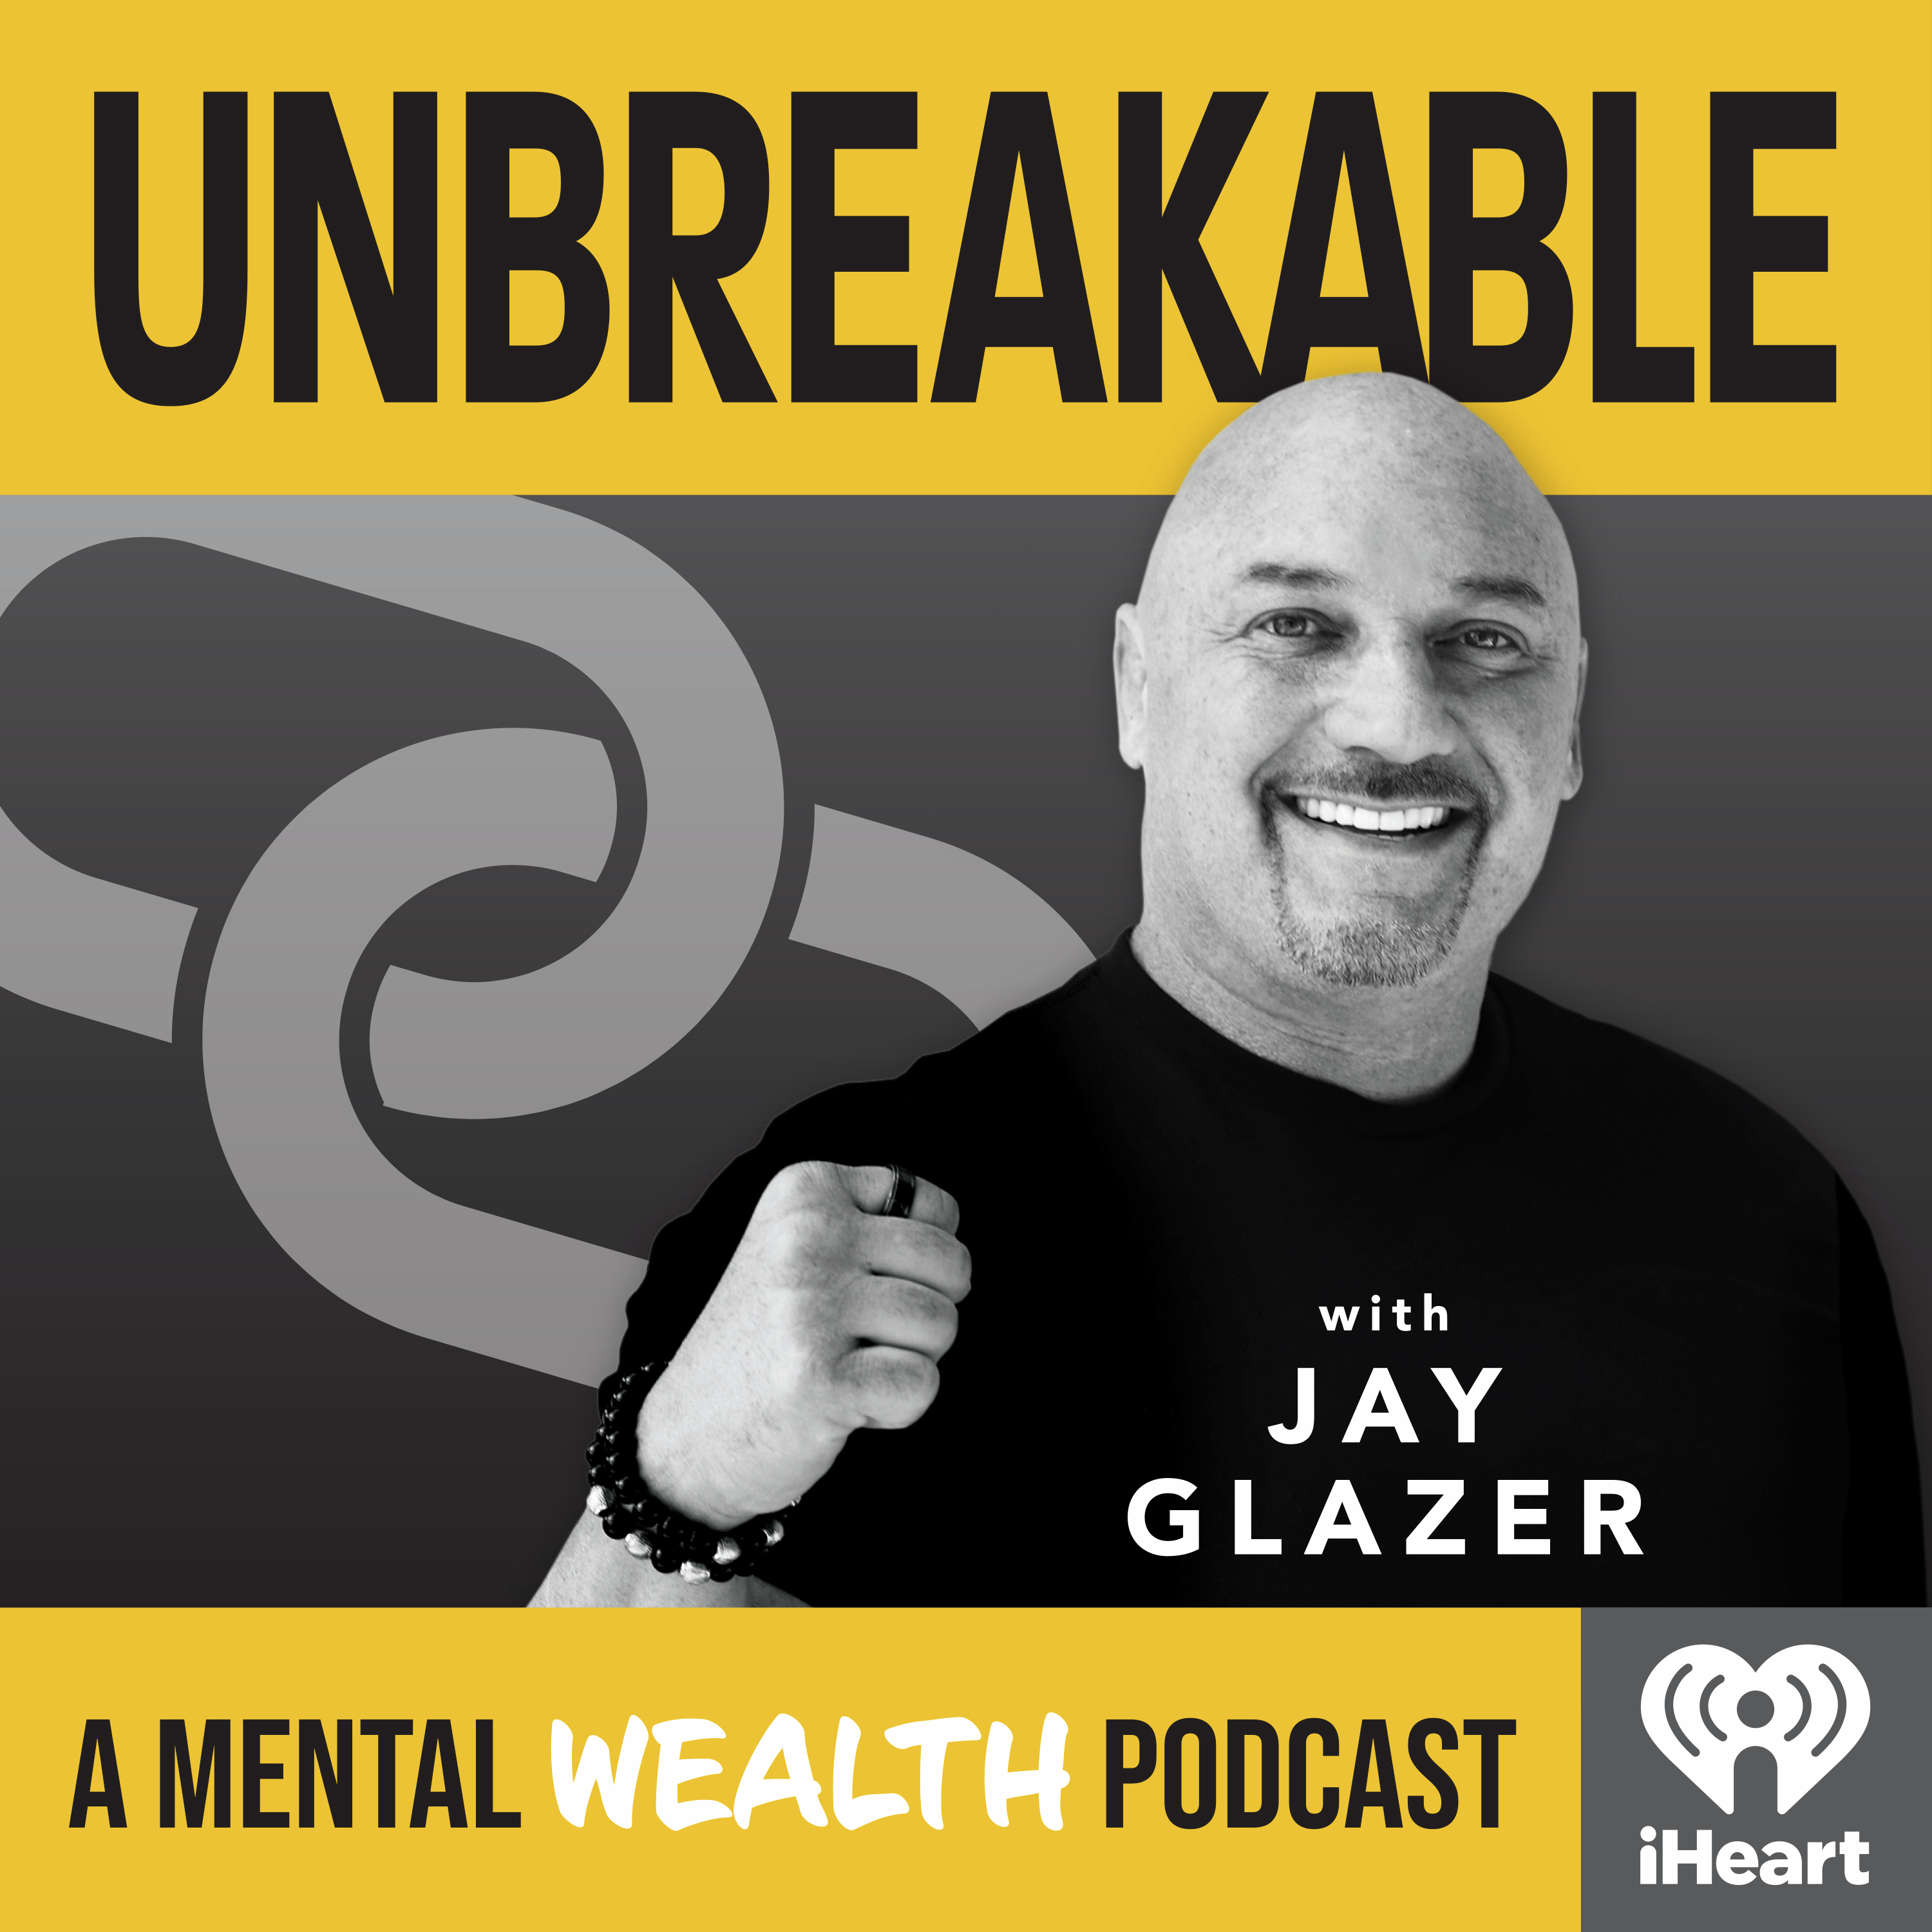 Unbreakable Episode 8 - Anthony Migliore